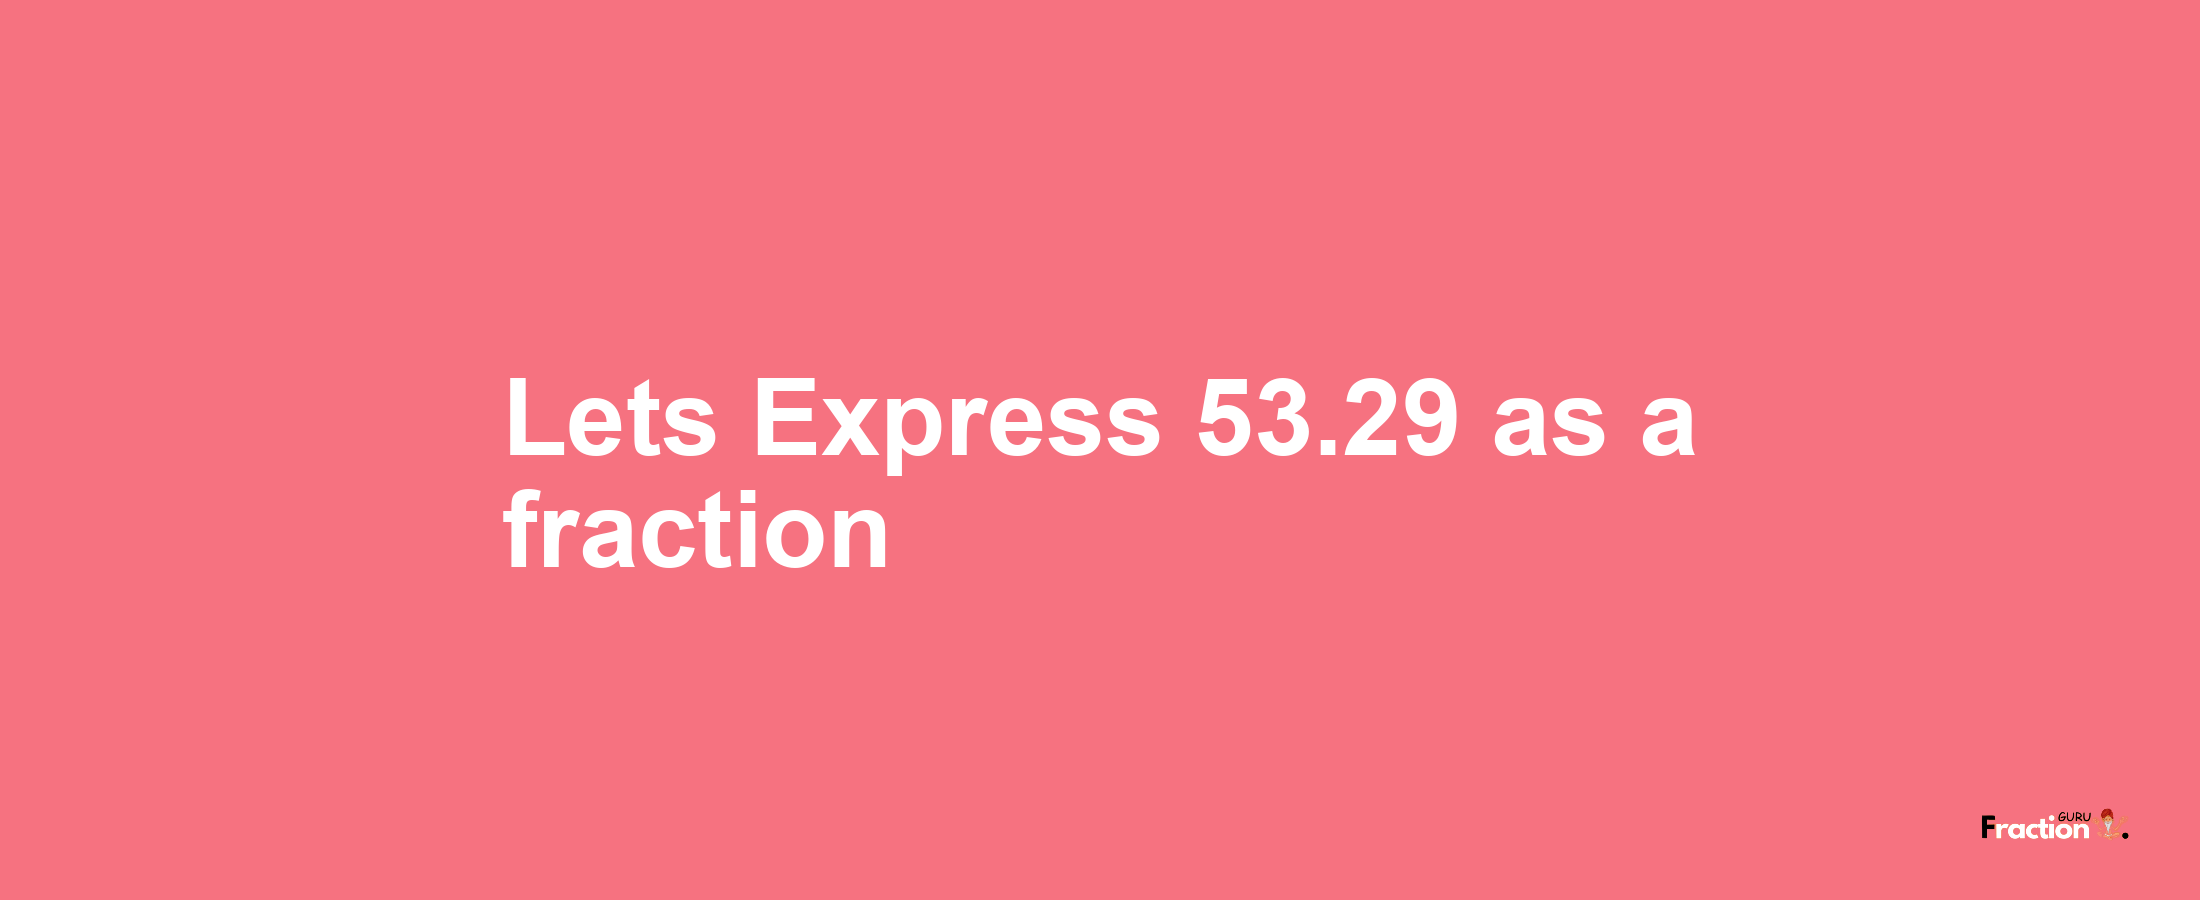 Lets Express 53.29 as afraction